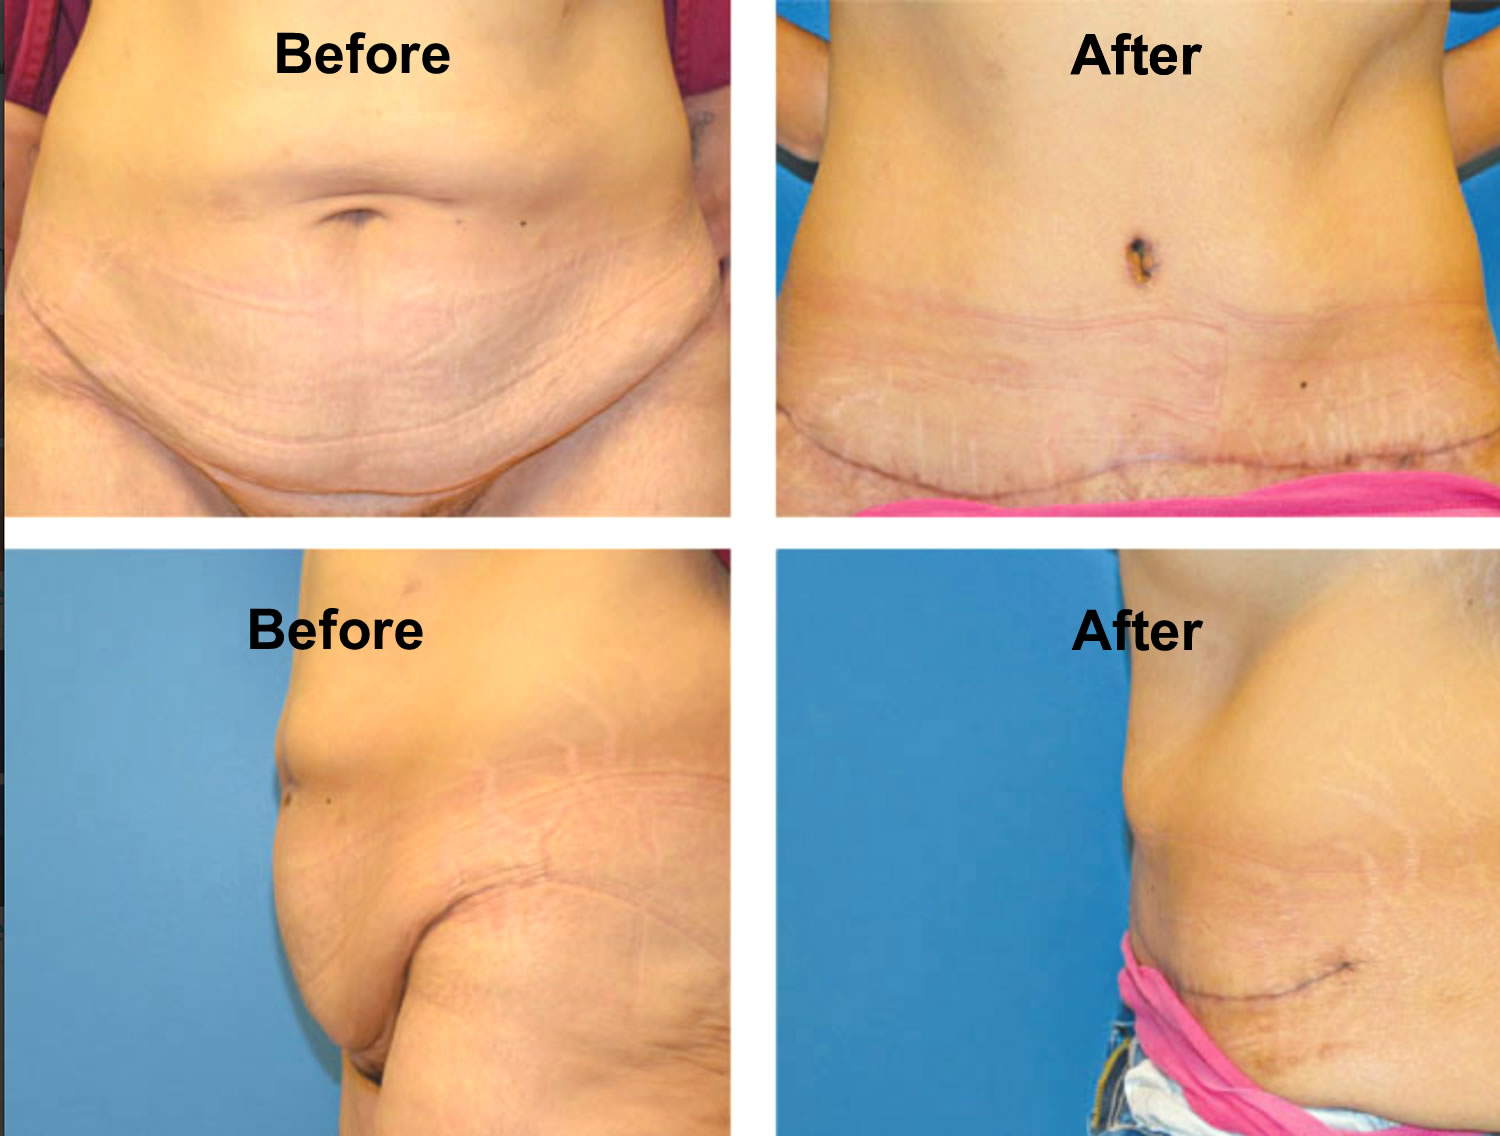 Panniculectomy before and after